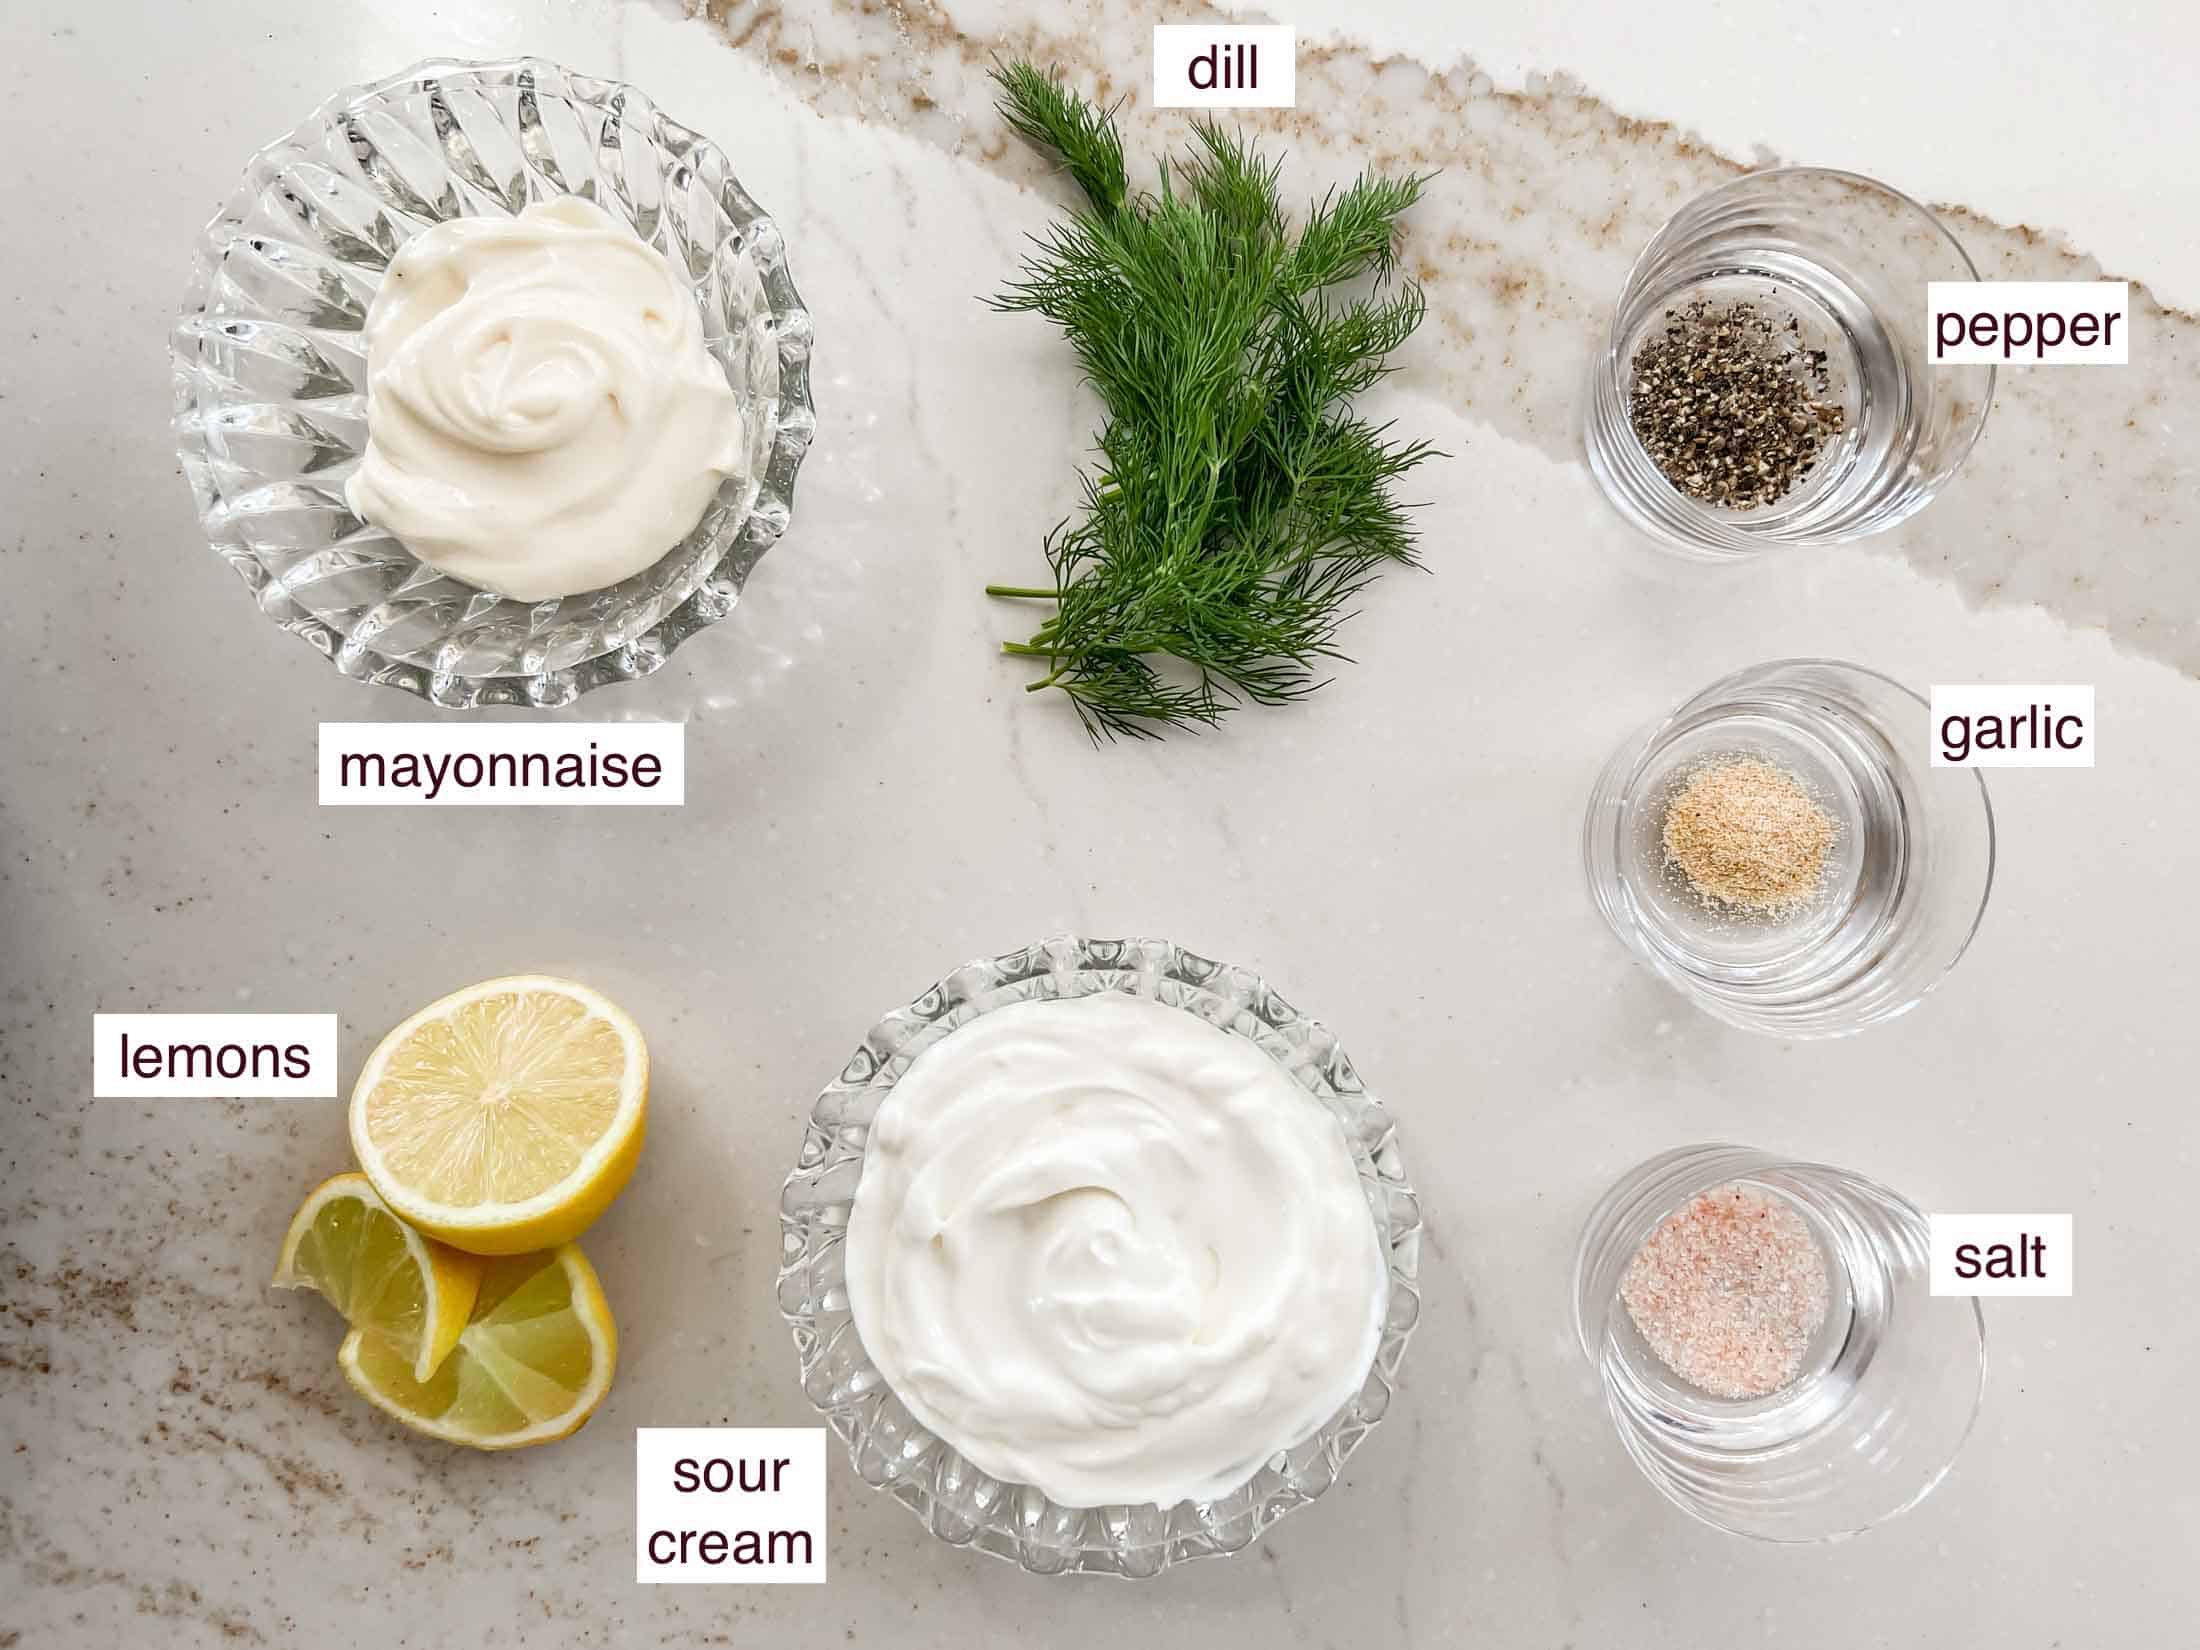 Key ingredients for creamy dill smoked salmon sauce including garlic, pepper, dill, mayo, lemons, sour cream, salt.